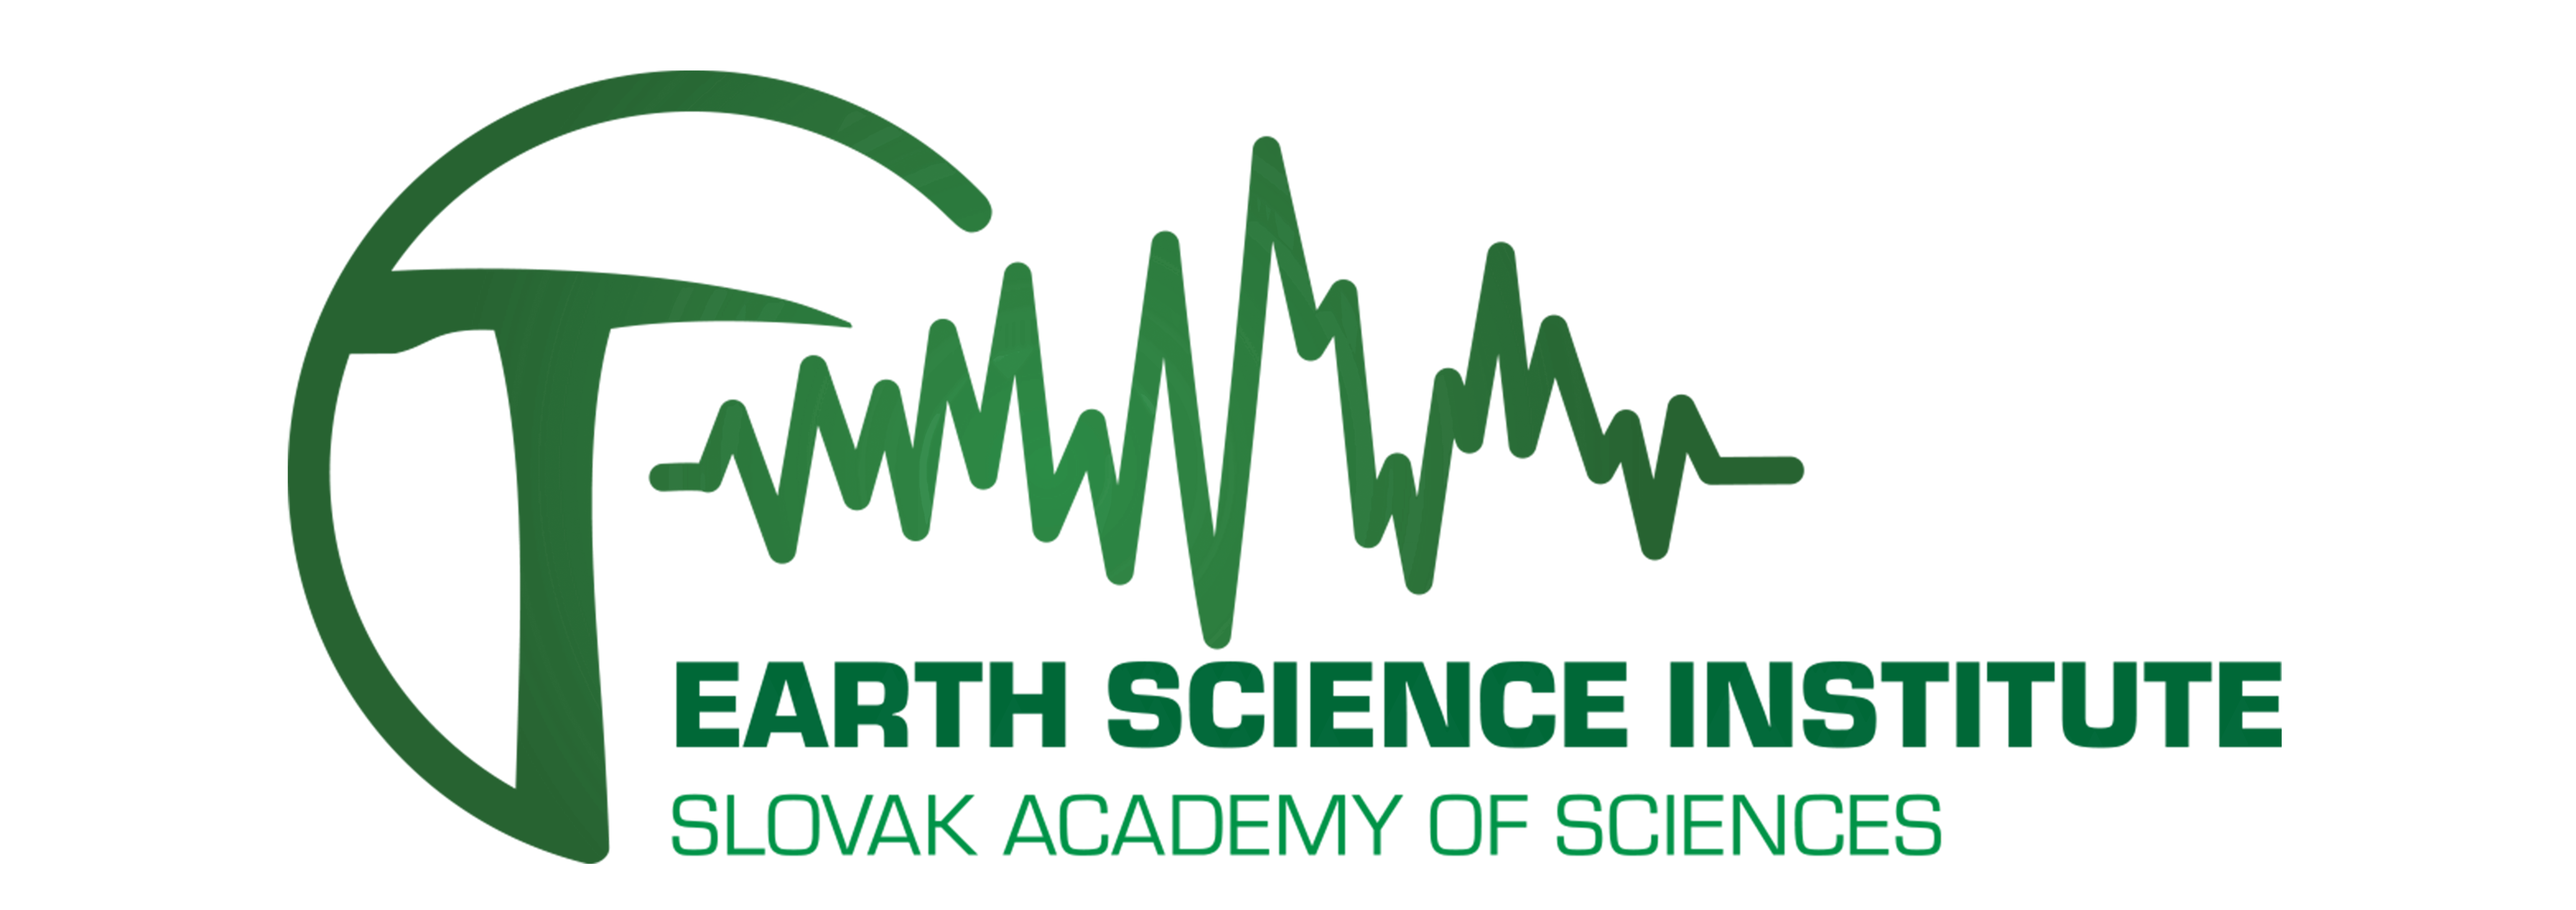 Earth Science Institute of Slovak Academy of Sciences Logo